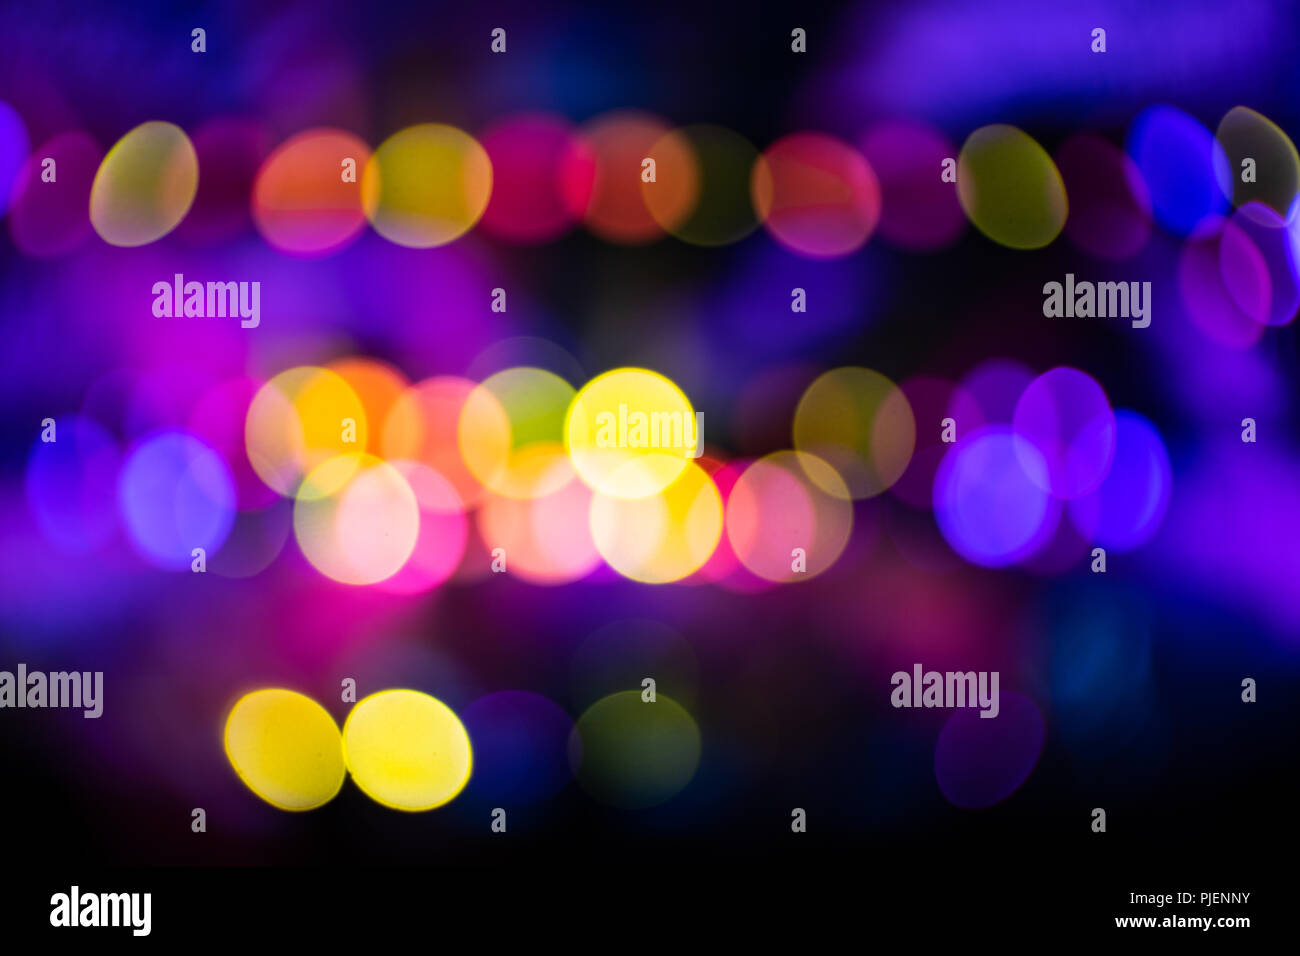 Abstraction with blurry colorful light circles Stock Photo